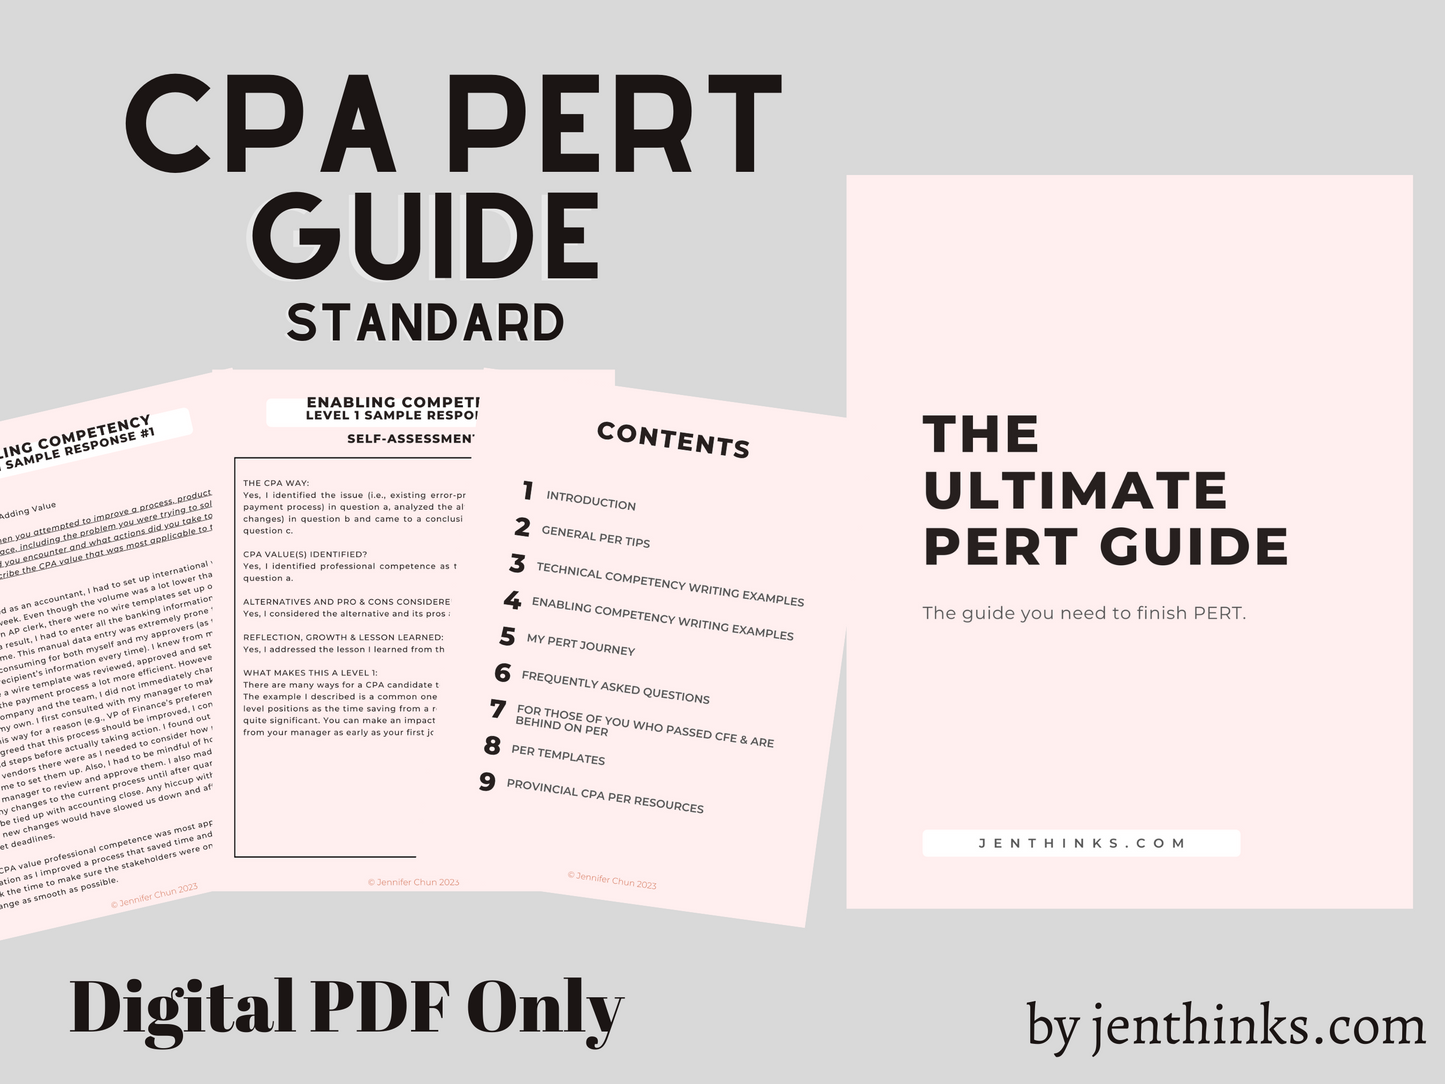 The CPA PERT Guide by jenthinks (Standard)